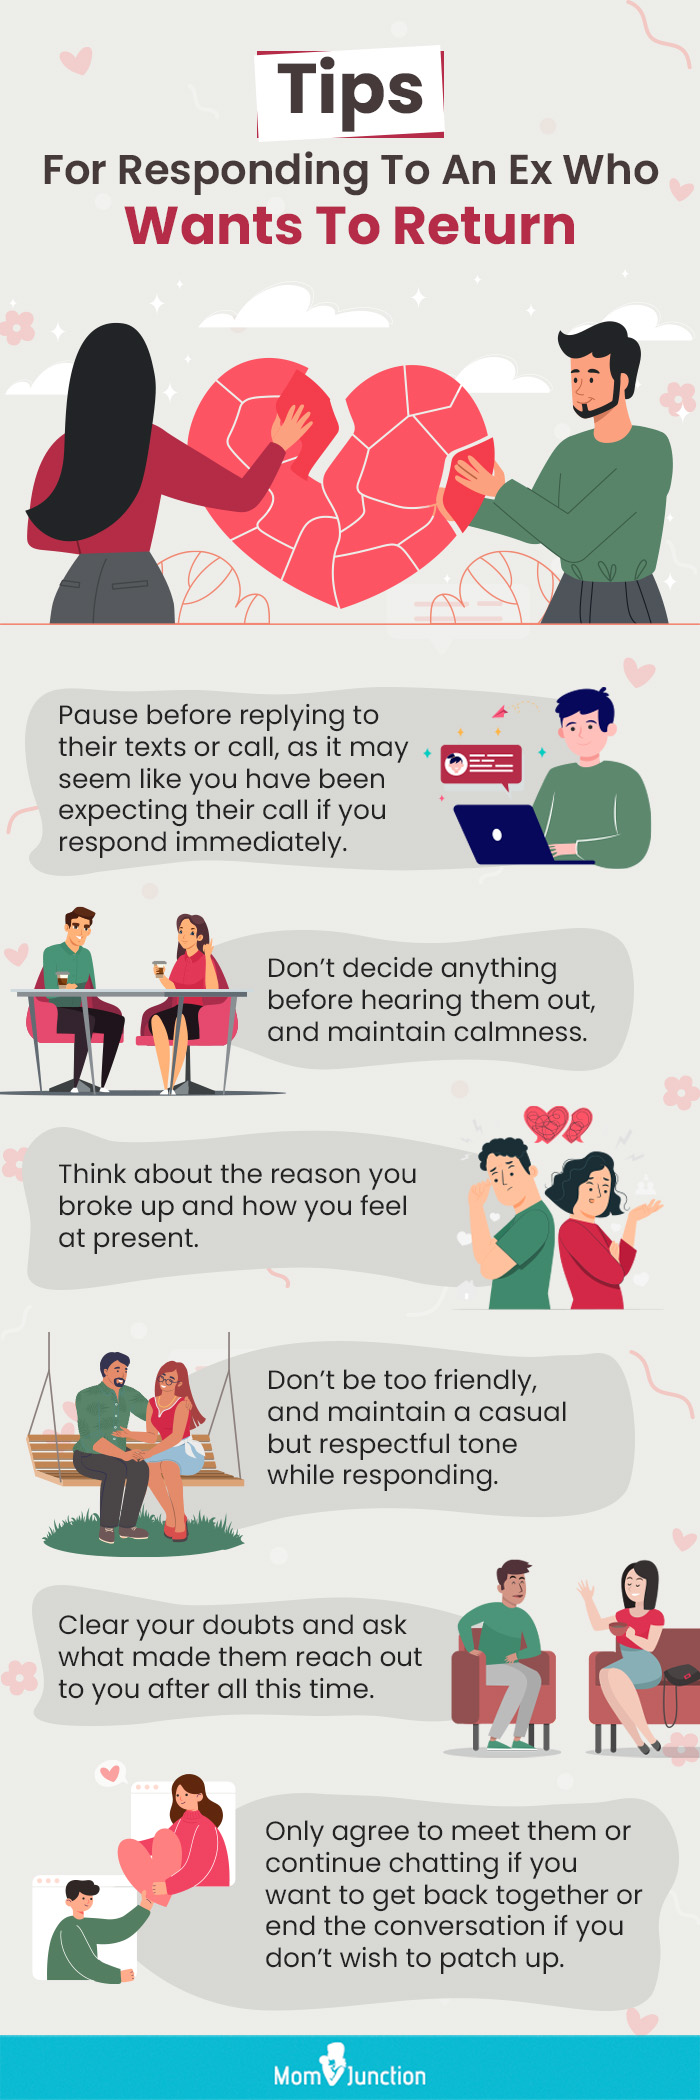 tips for responding to an ex who wants to return [infographic]